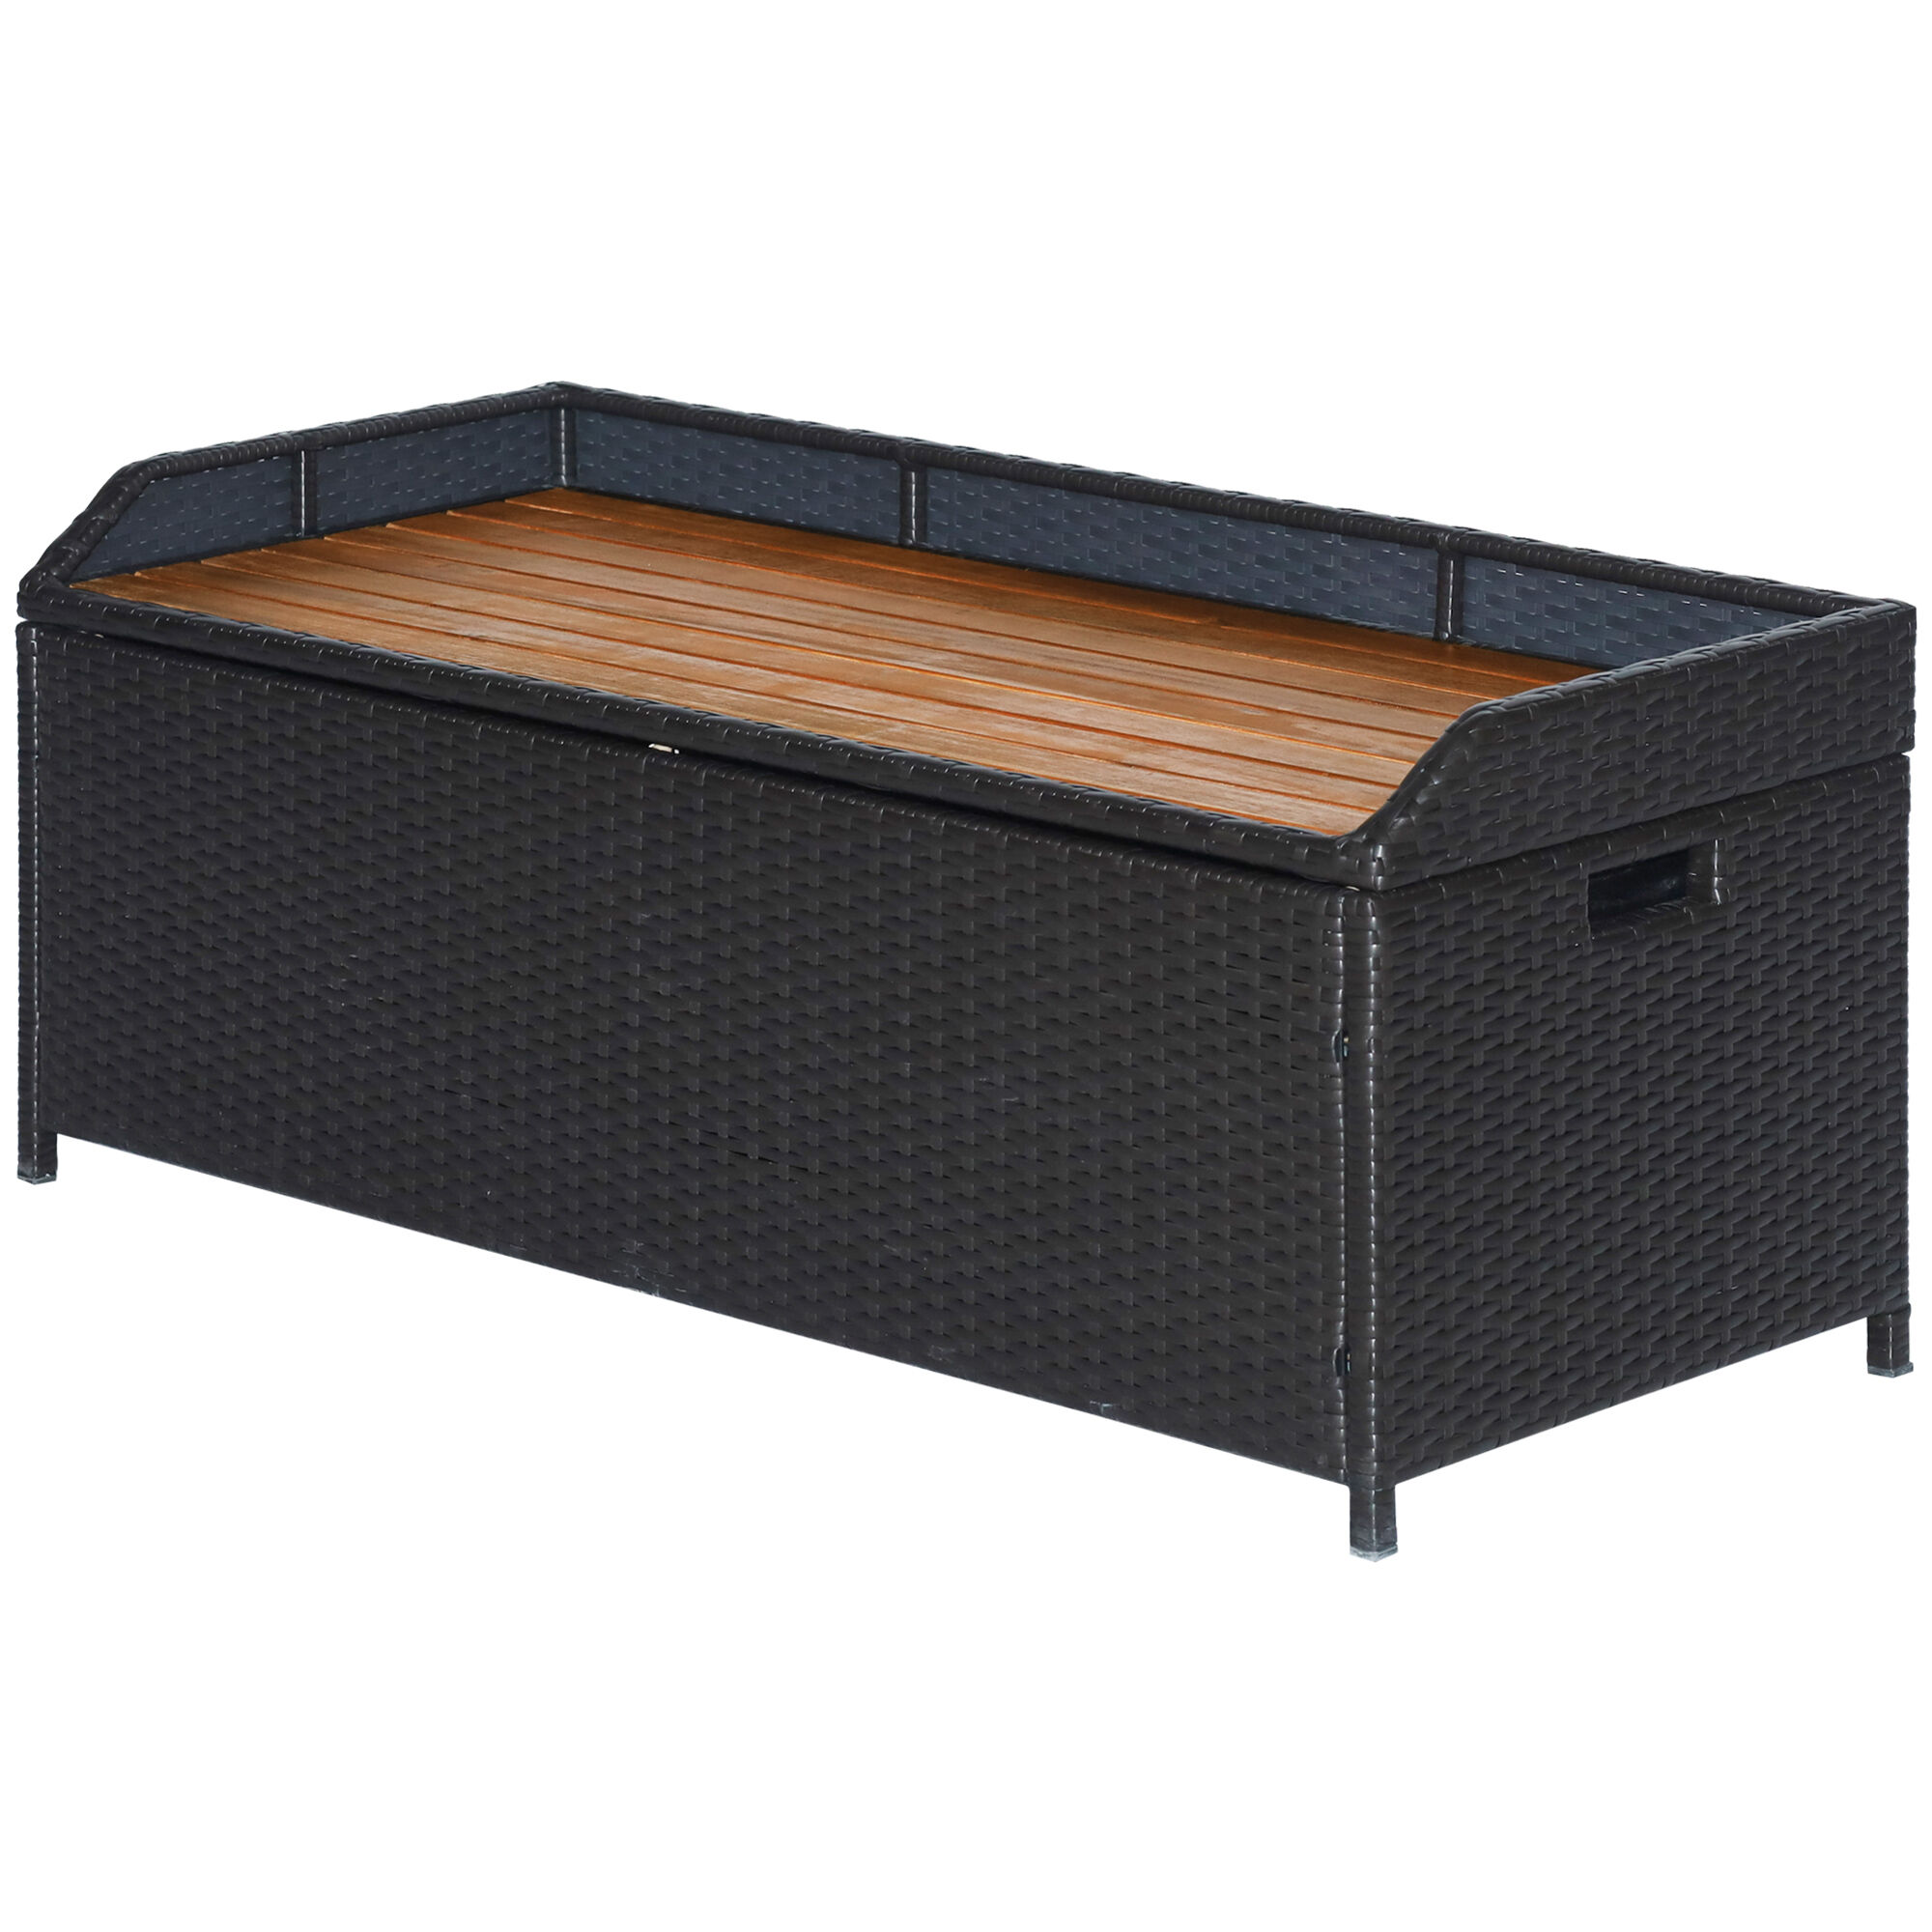 Outsunny Patio Storage Bench with Wooden Seat Black Wicker Outdoor Furniture Gas Spring Rattan Container for Tools   Aosom.com